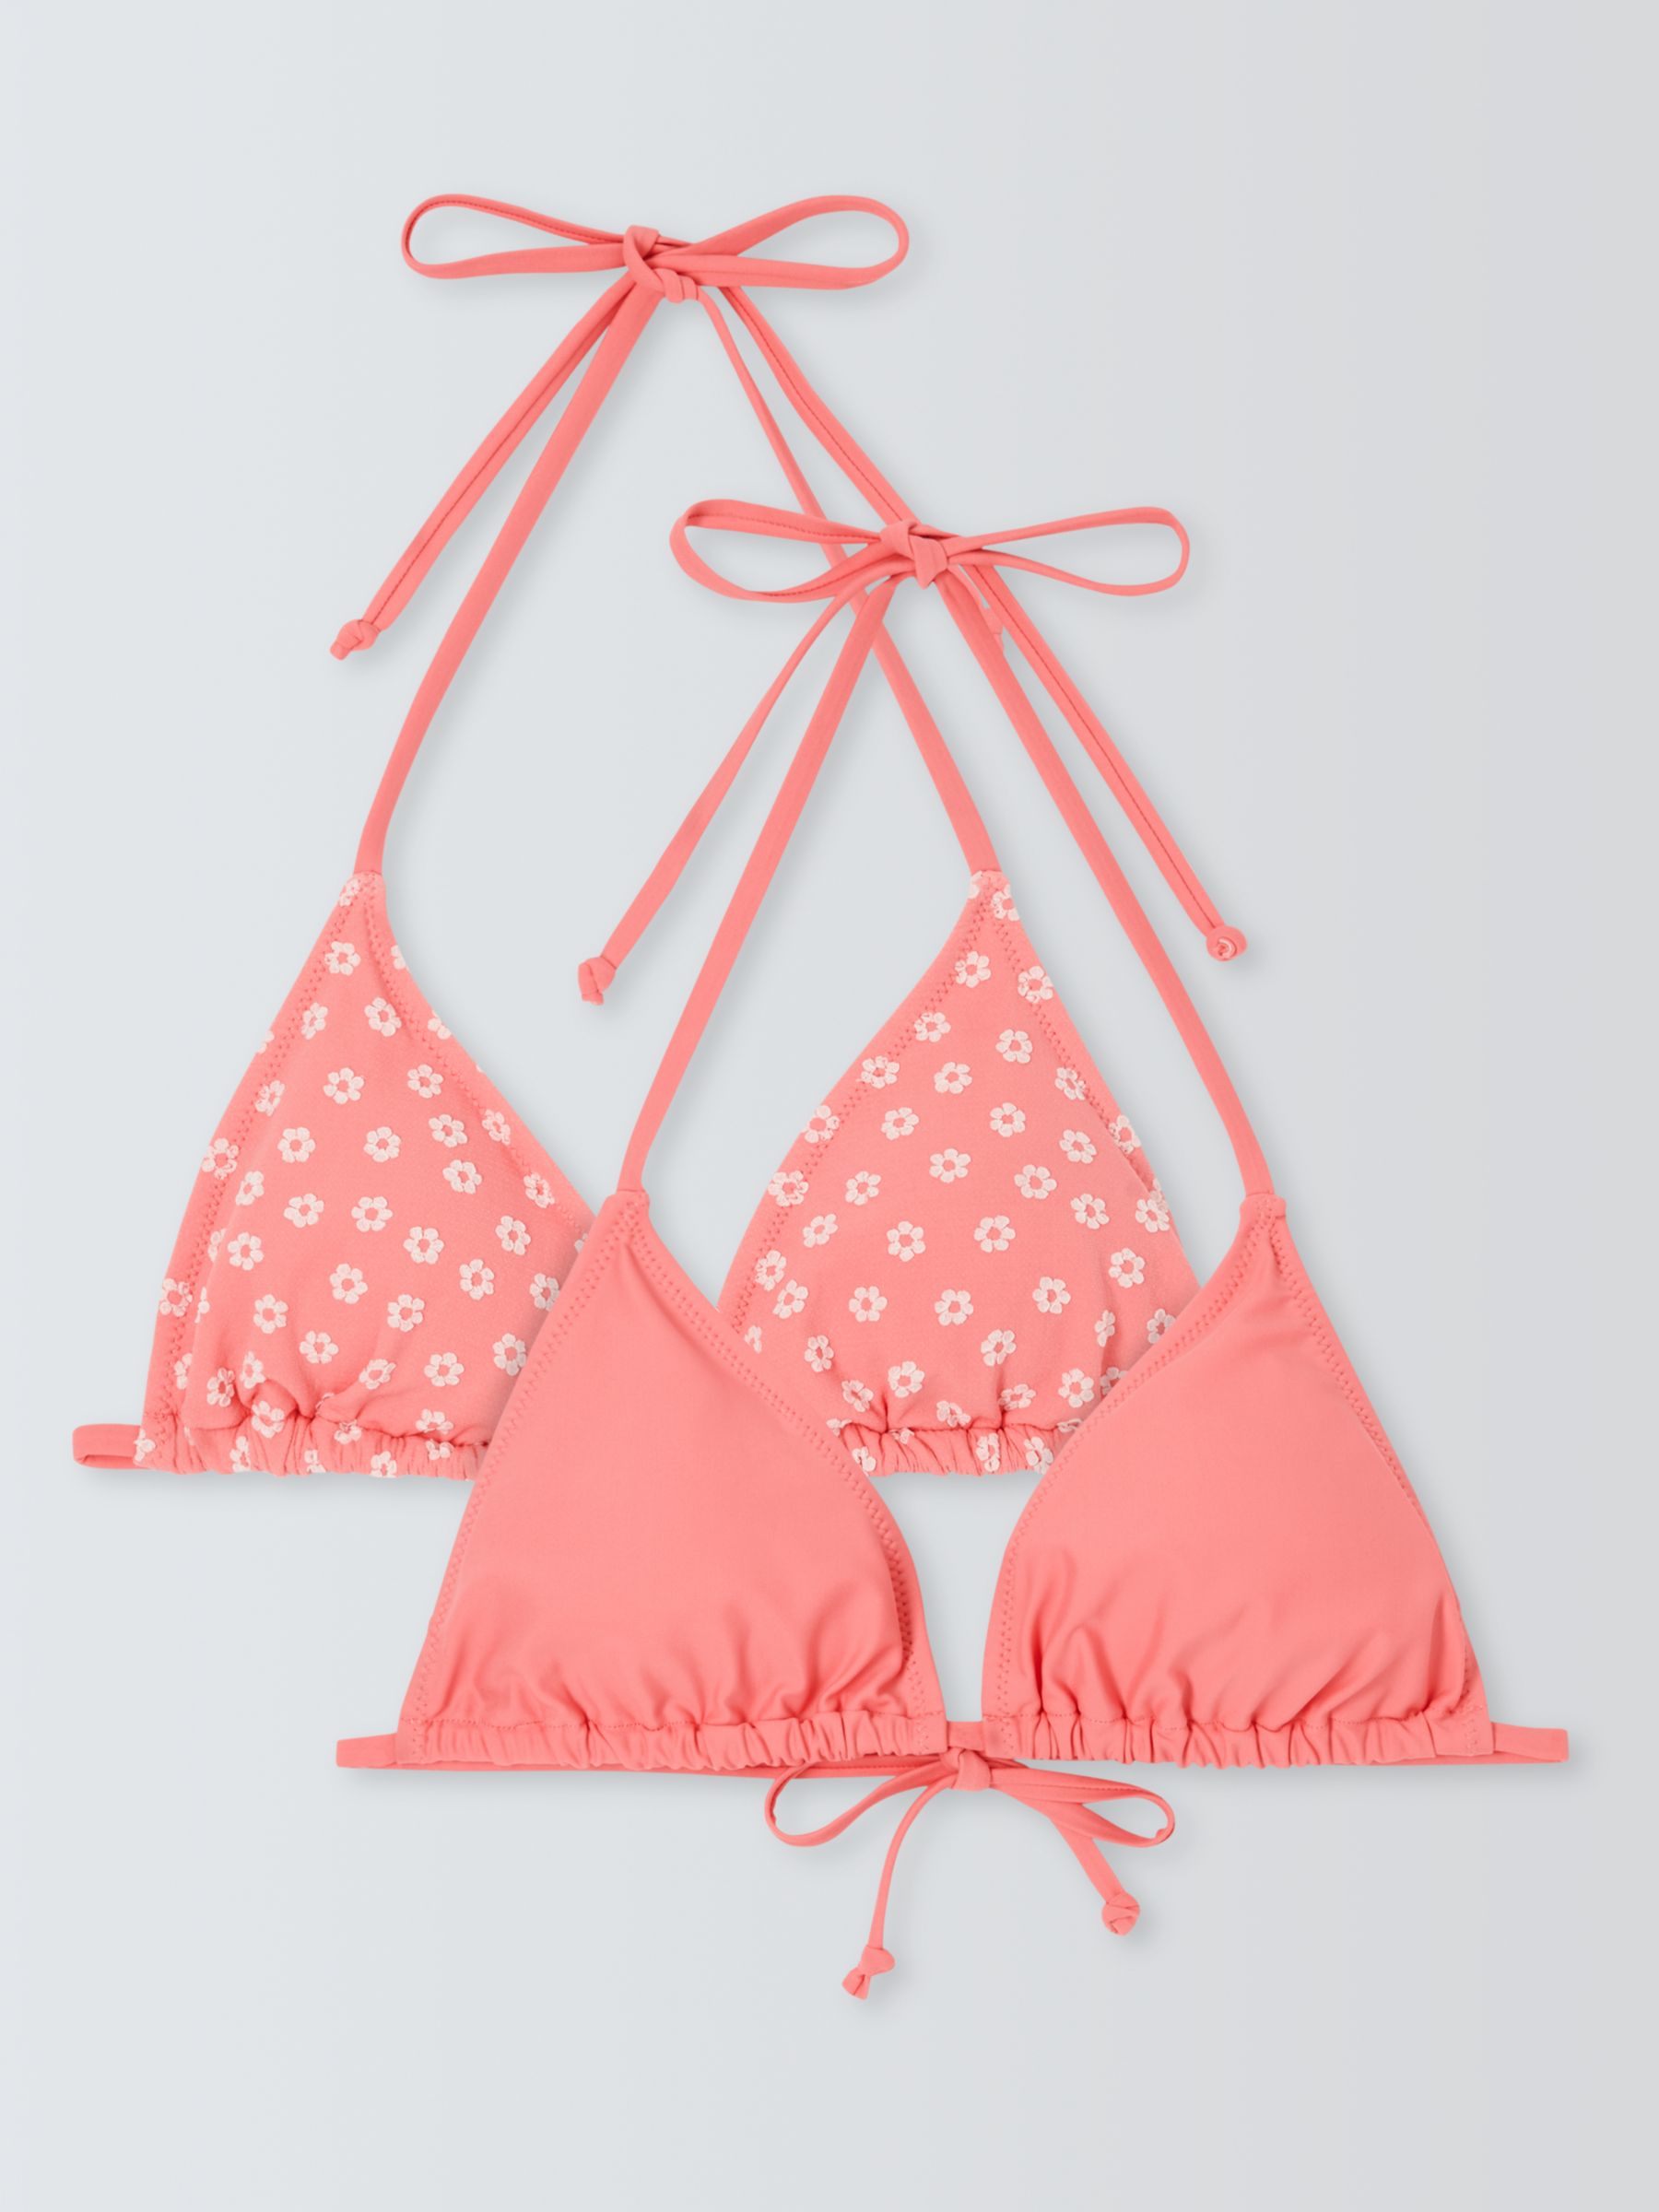 John Lewis ANYDAY Jacquard Flower Triangle Bikini Top, Pack of 2, Bright Coral, 18